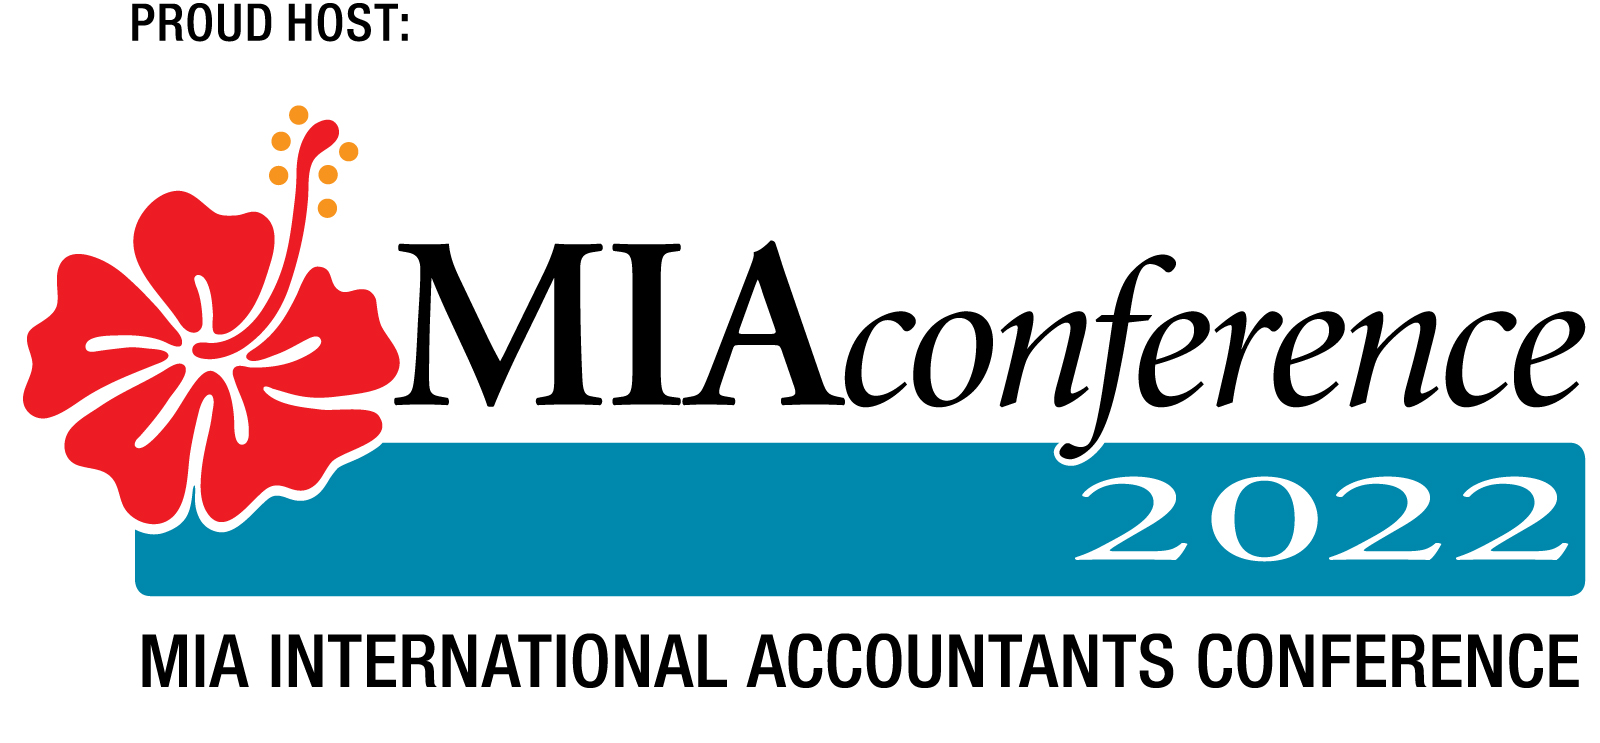 MIA International Accountants Conference 2022, Online Event